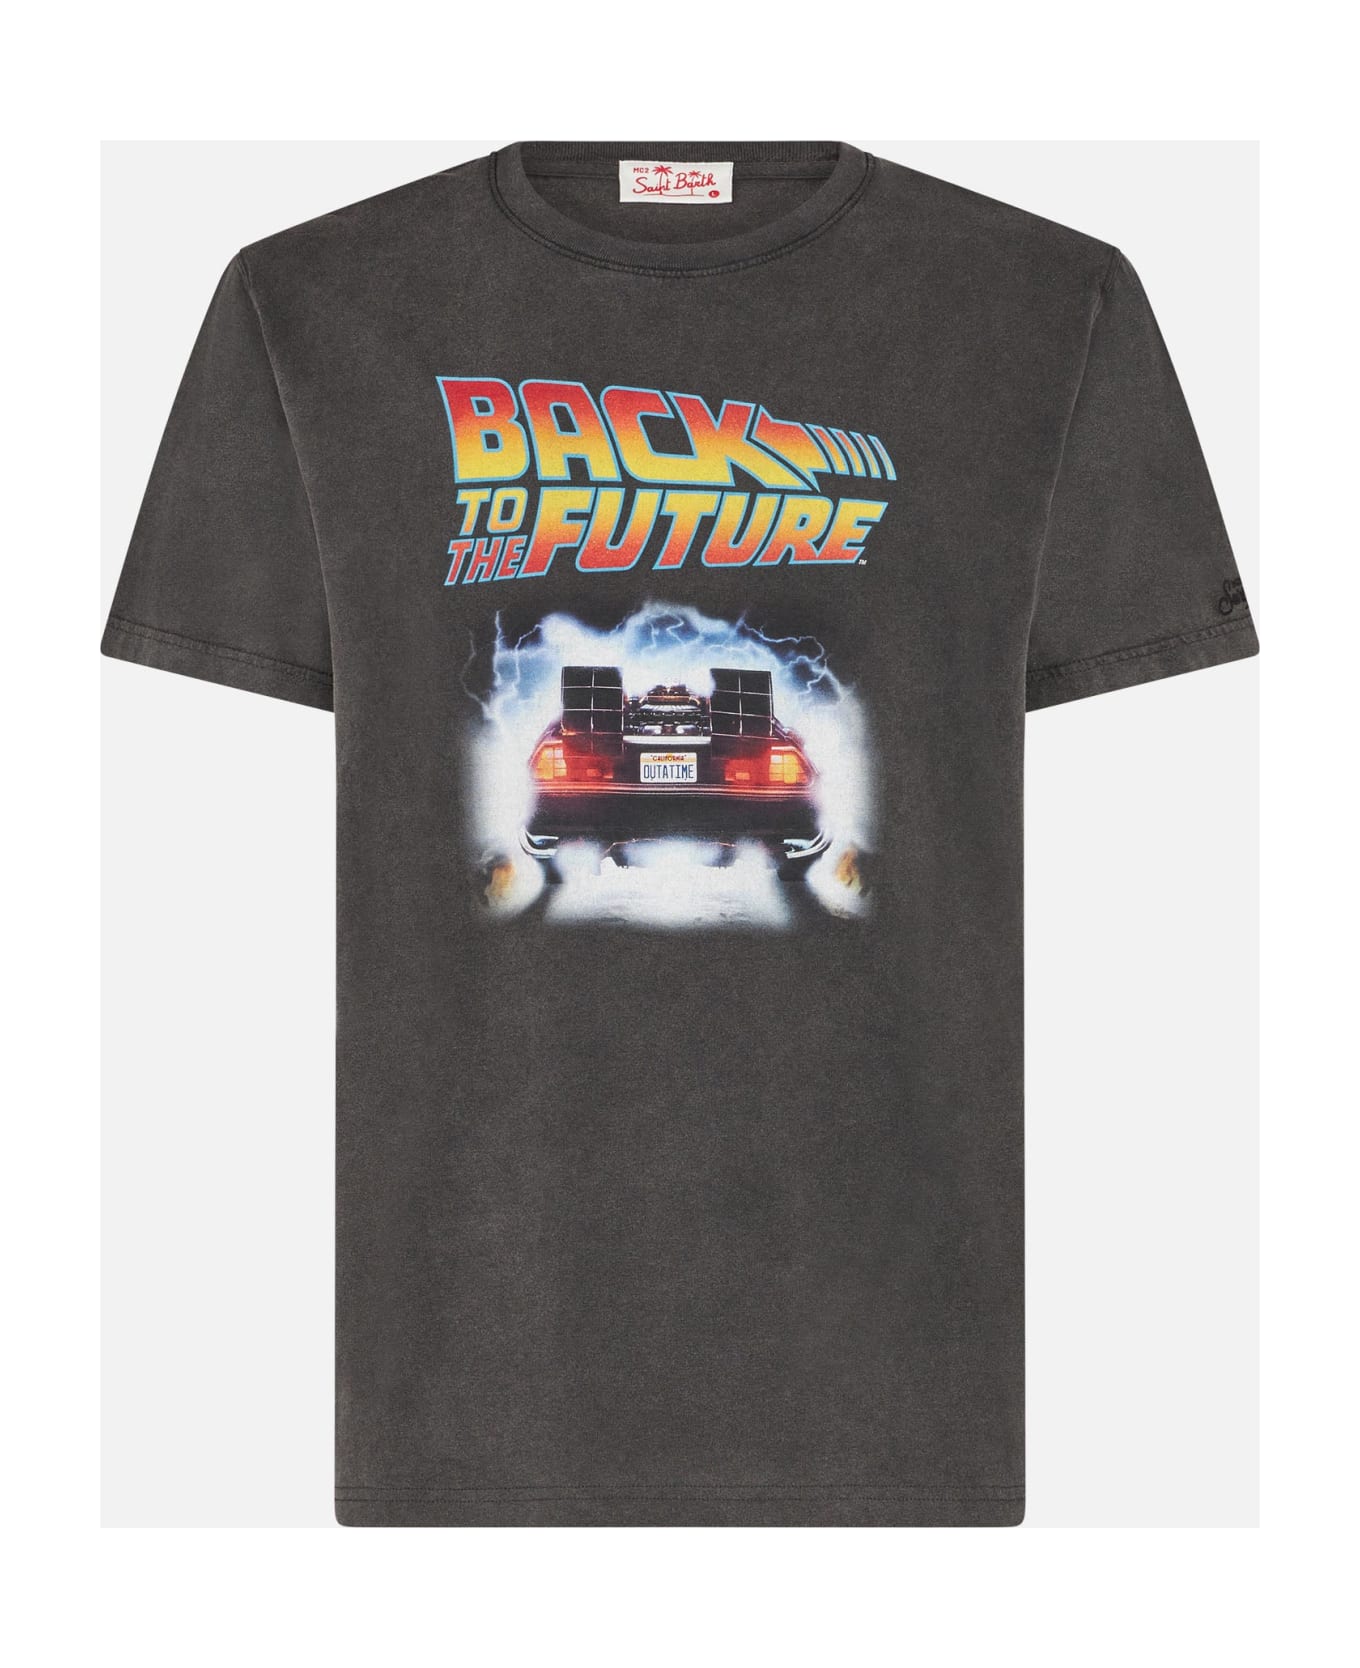 MC2 Saint Barth Man Cotton T-shirt With Back To The Future Front Print | Back To The Future Special Edition - BLACK